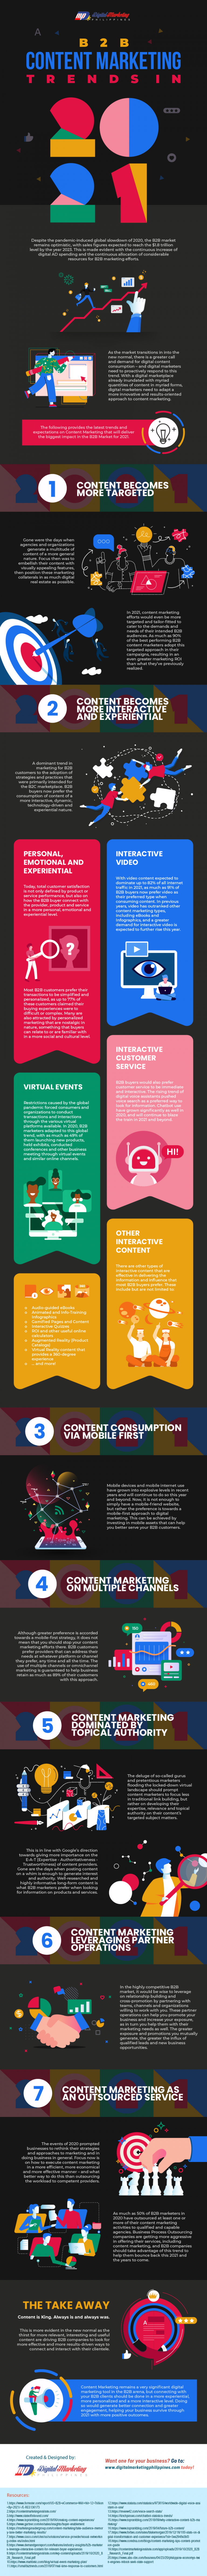 B2B Content Marketing Trends in 2021 [Infographic]